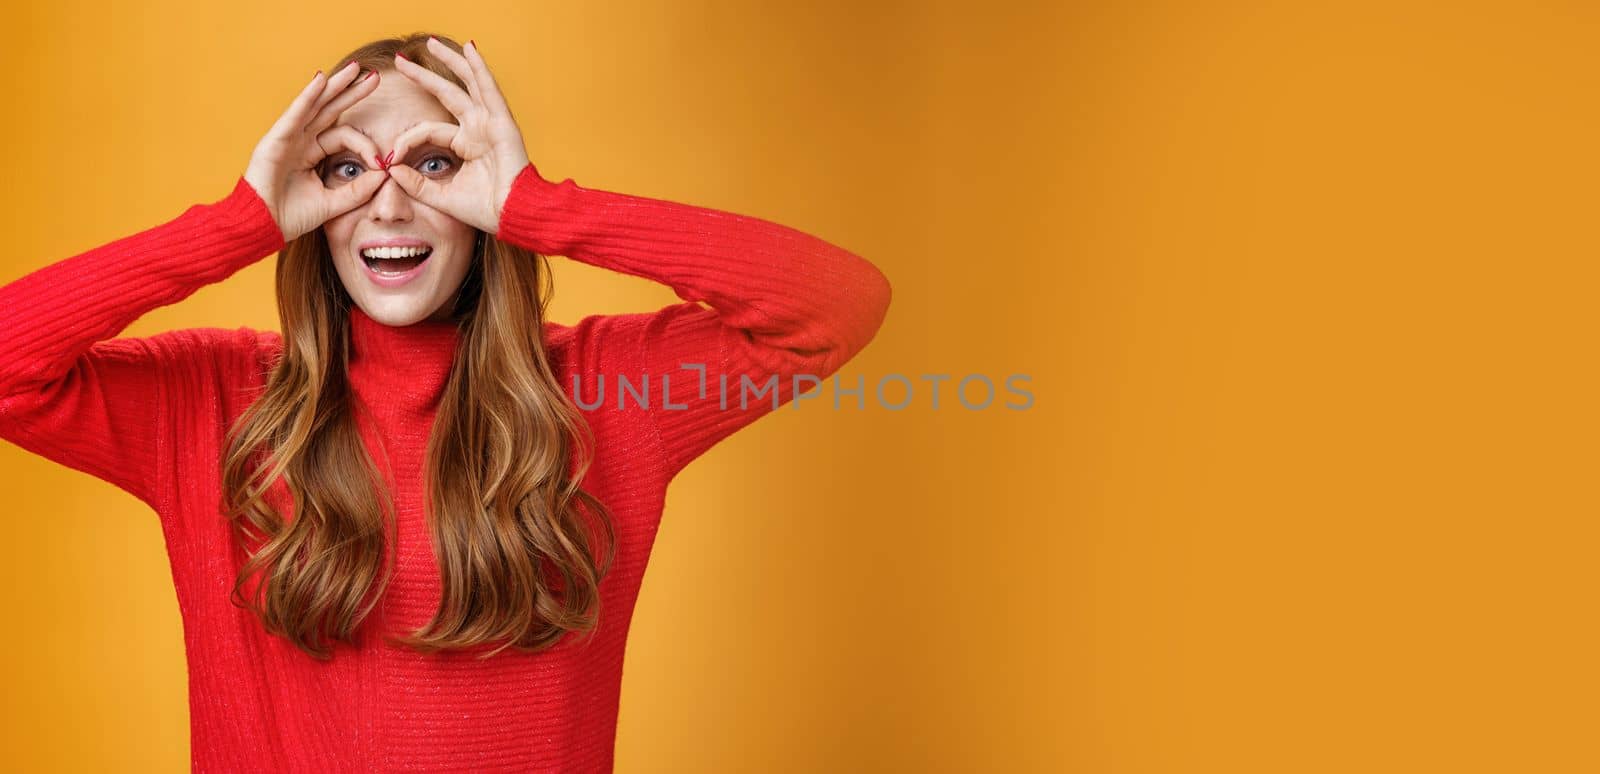 Waist-up shot of childish and playful funny ginger girl in red knitted dress making faces showing circles over eyes like goggles and smiling broadly having fun against orange backgound like child. Copy space